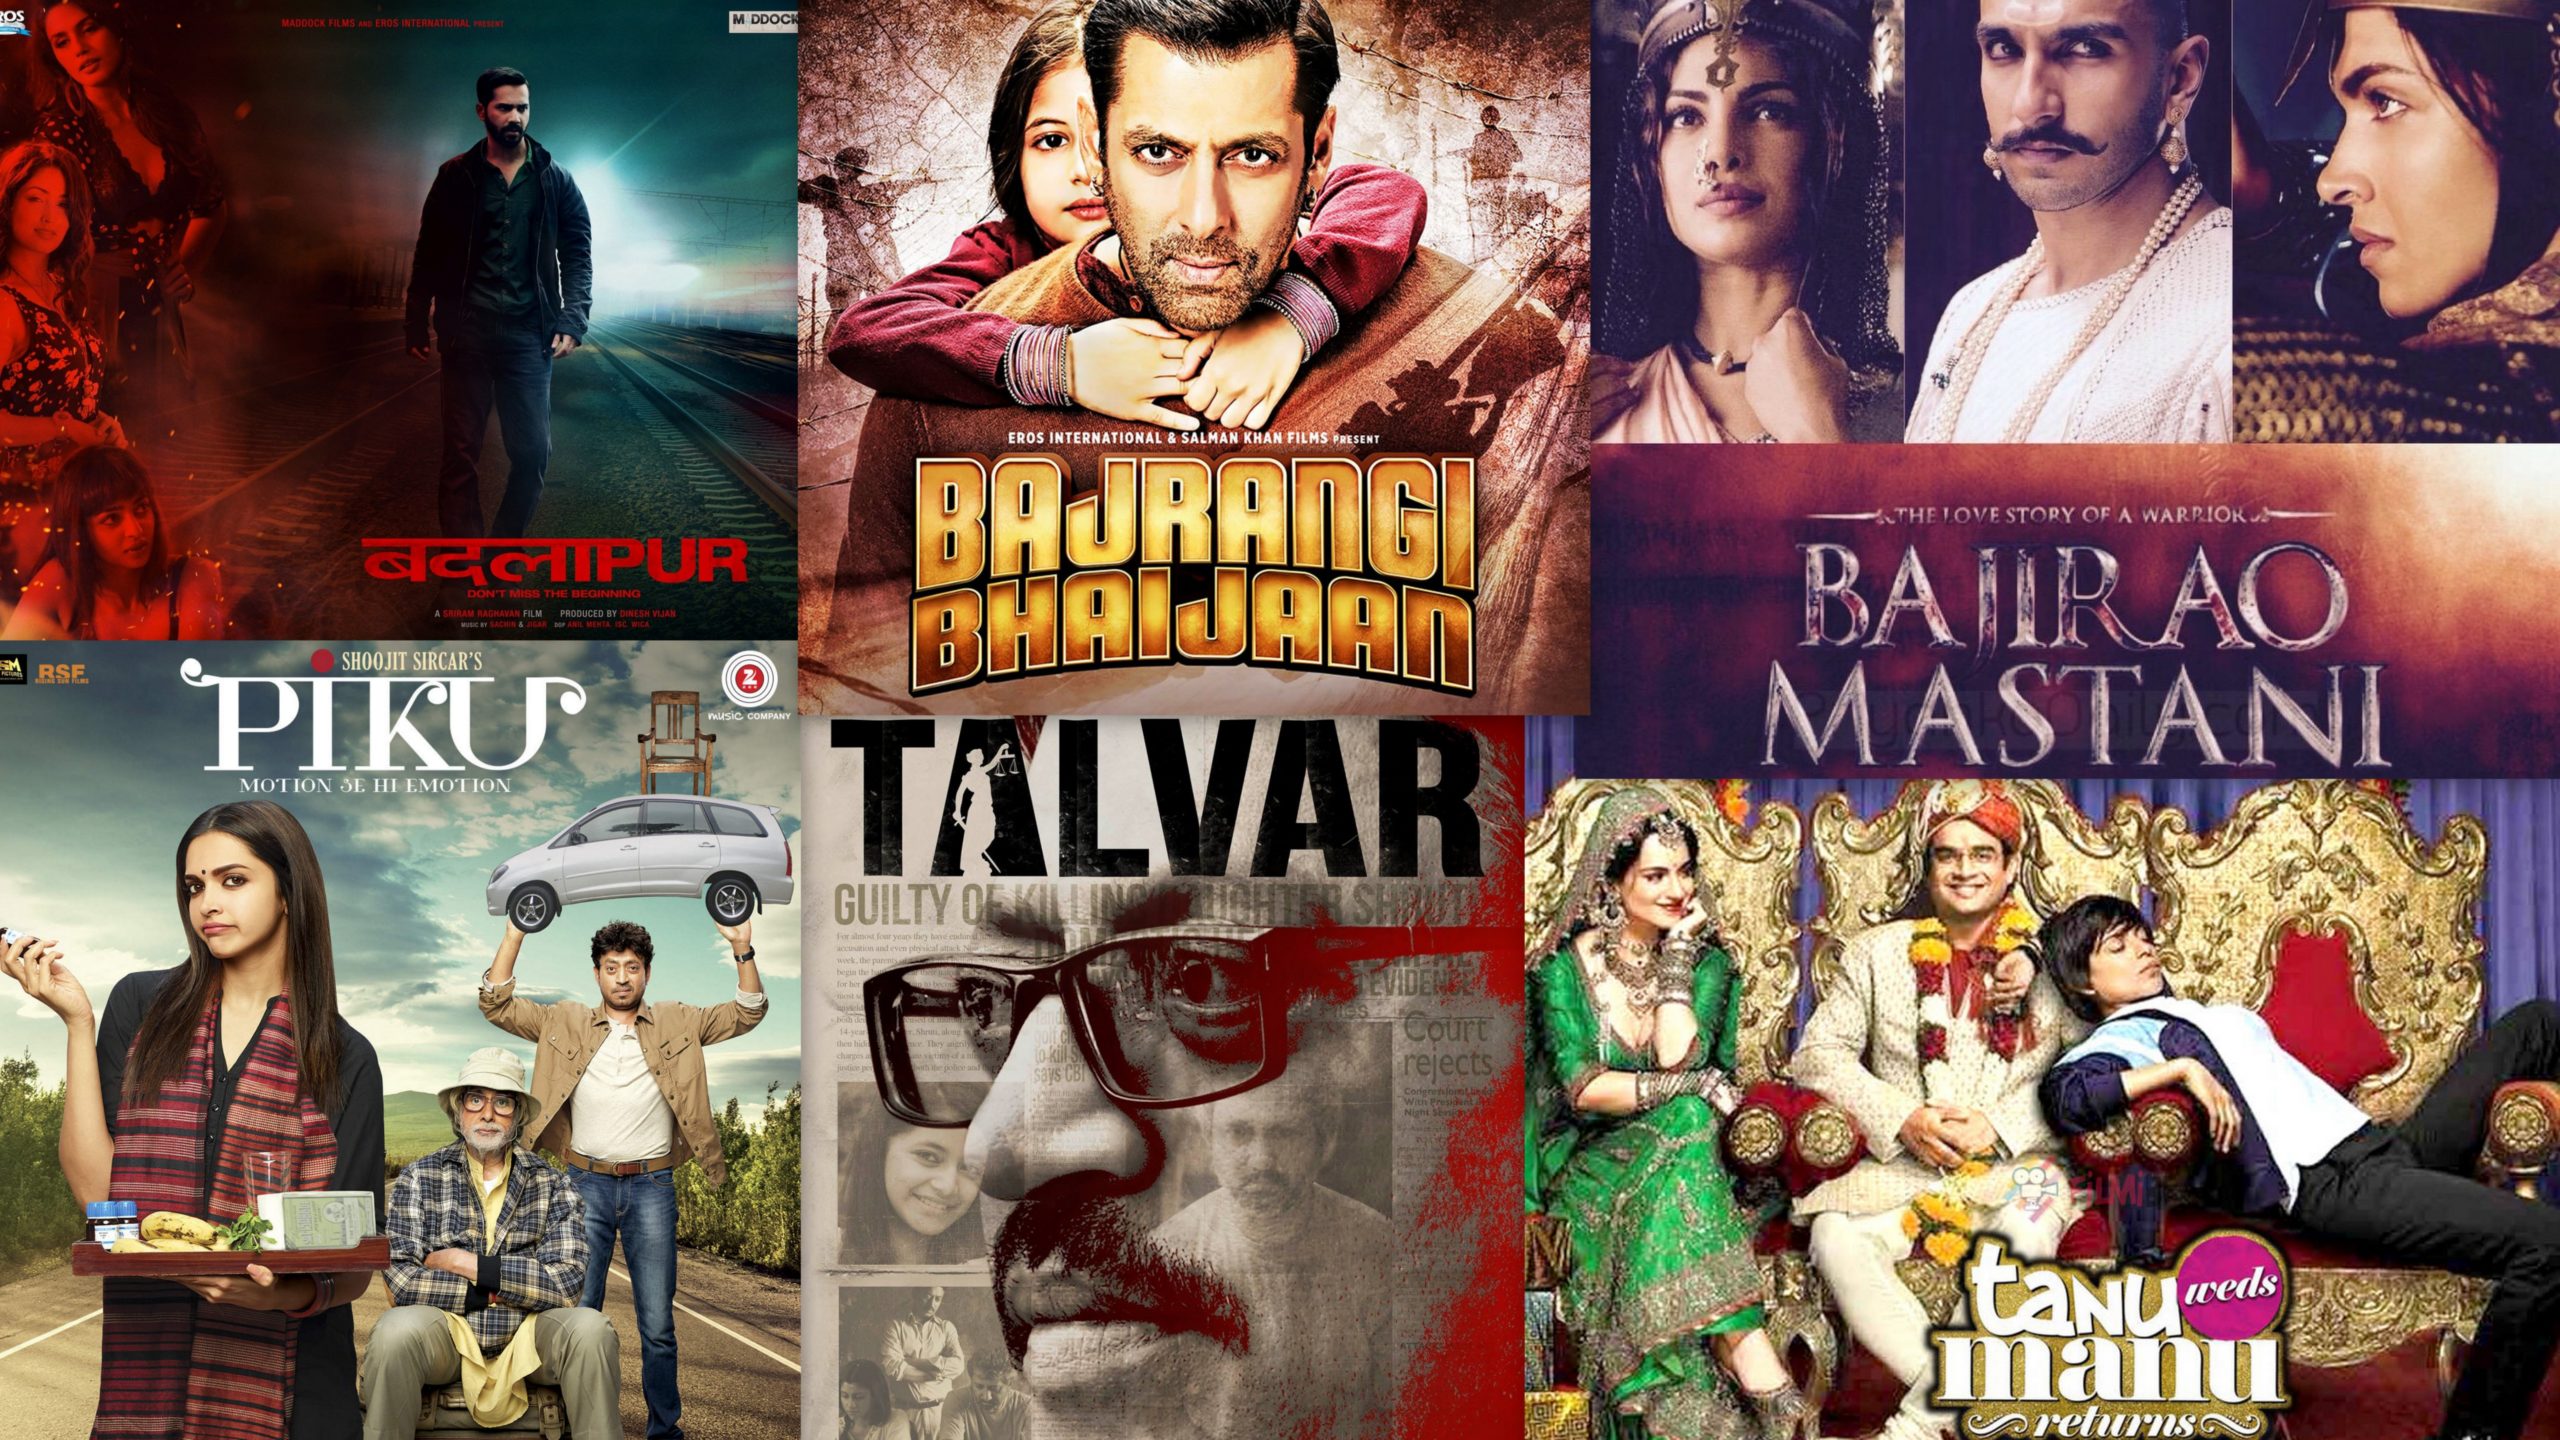 Moviemad Website 2021: Watch Download Bollywood Movies Online - Is it legal?